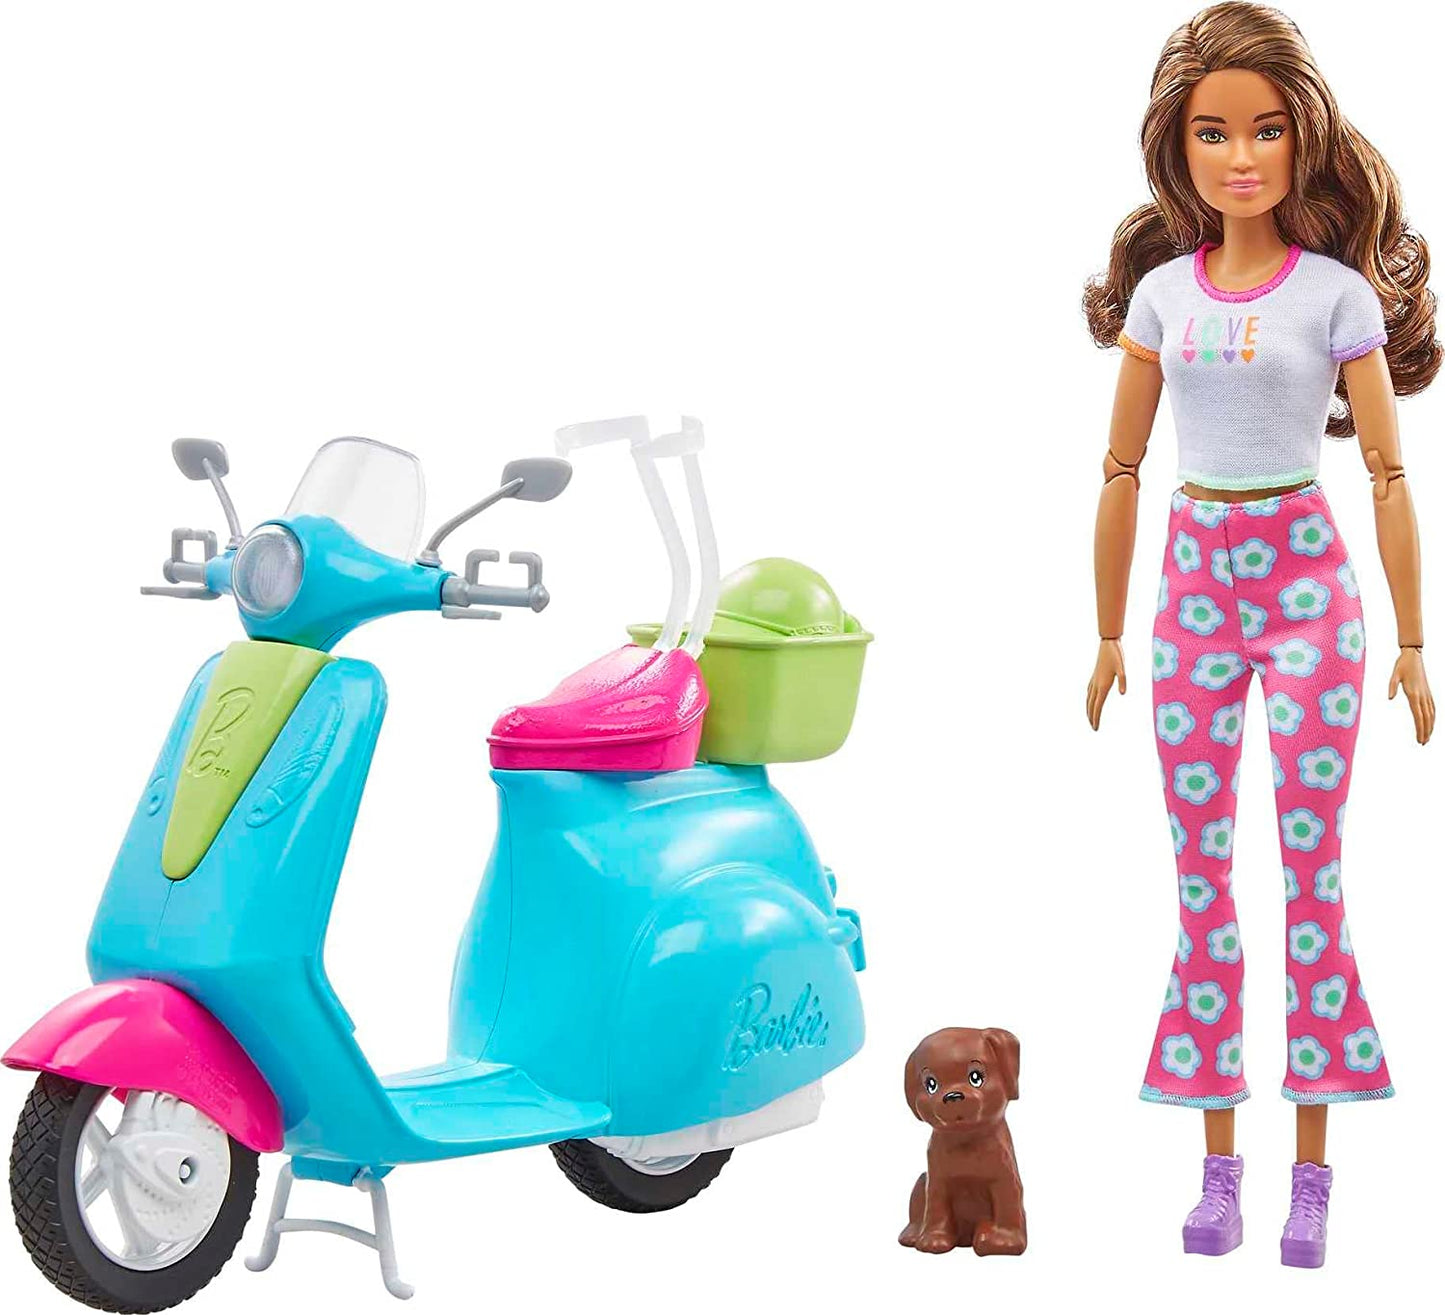 Barbie Fashionistas Doll and Scooter Travel Playset with Stickers, Pet Puppy and Themed Accessories including Map and Camera